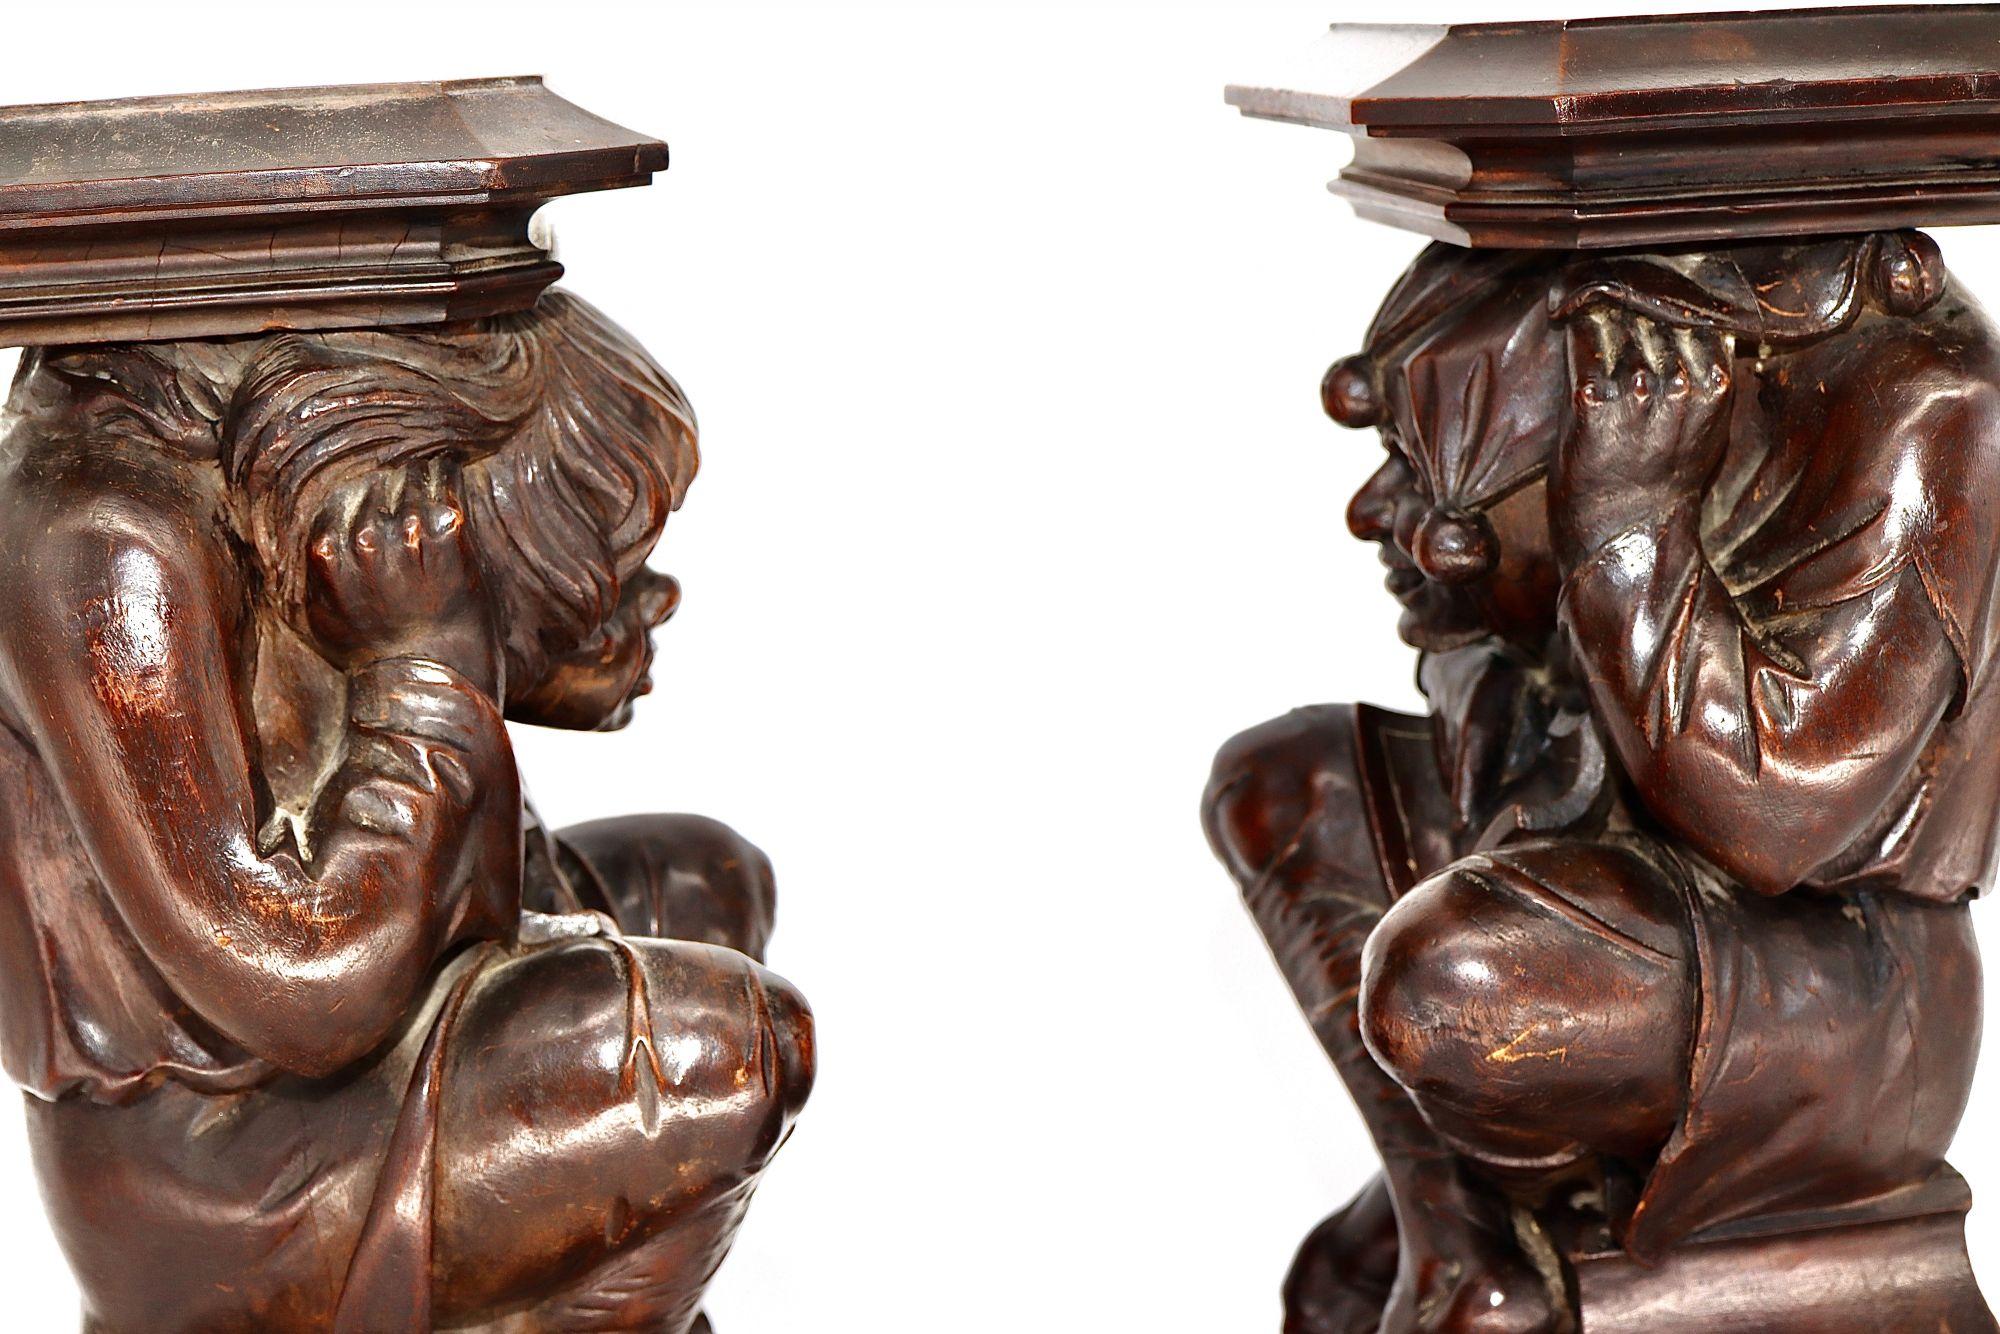 Monumental Pair of English Carved Walnut Wood Figures of Court Jesters, 18th C For Sale 6